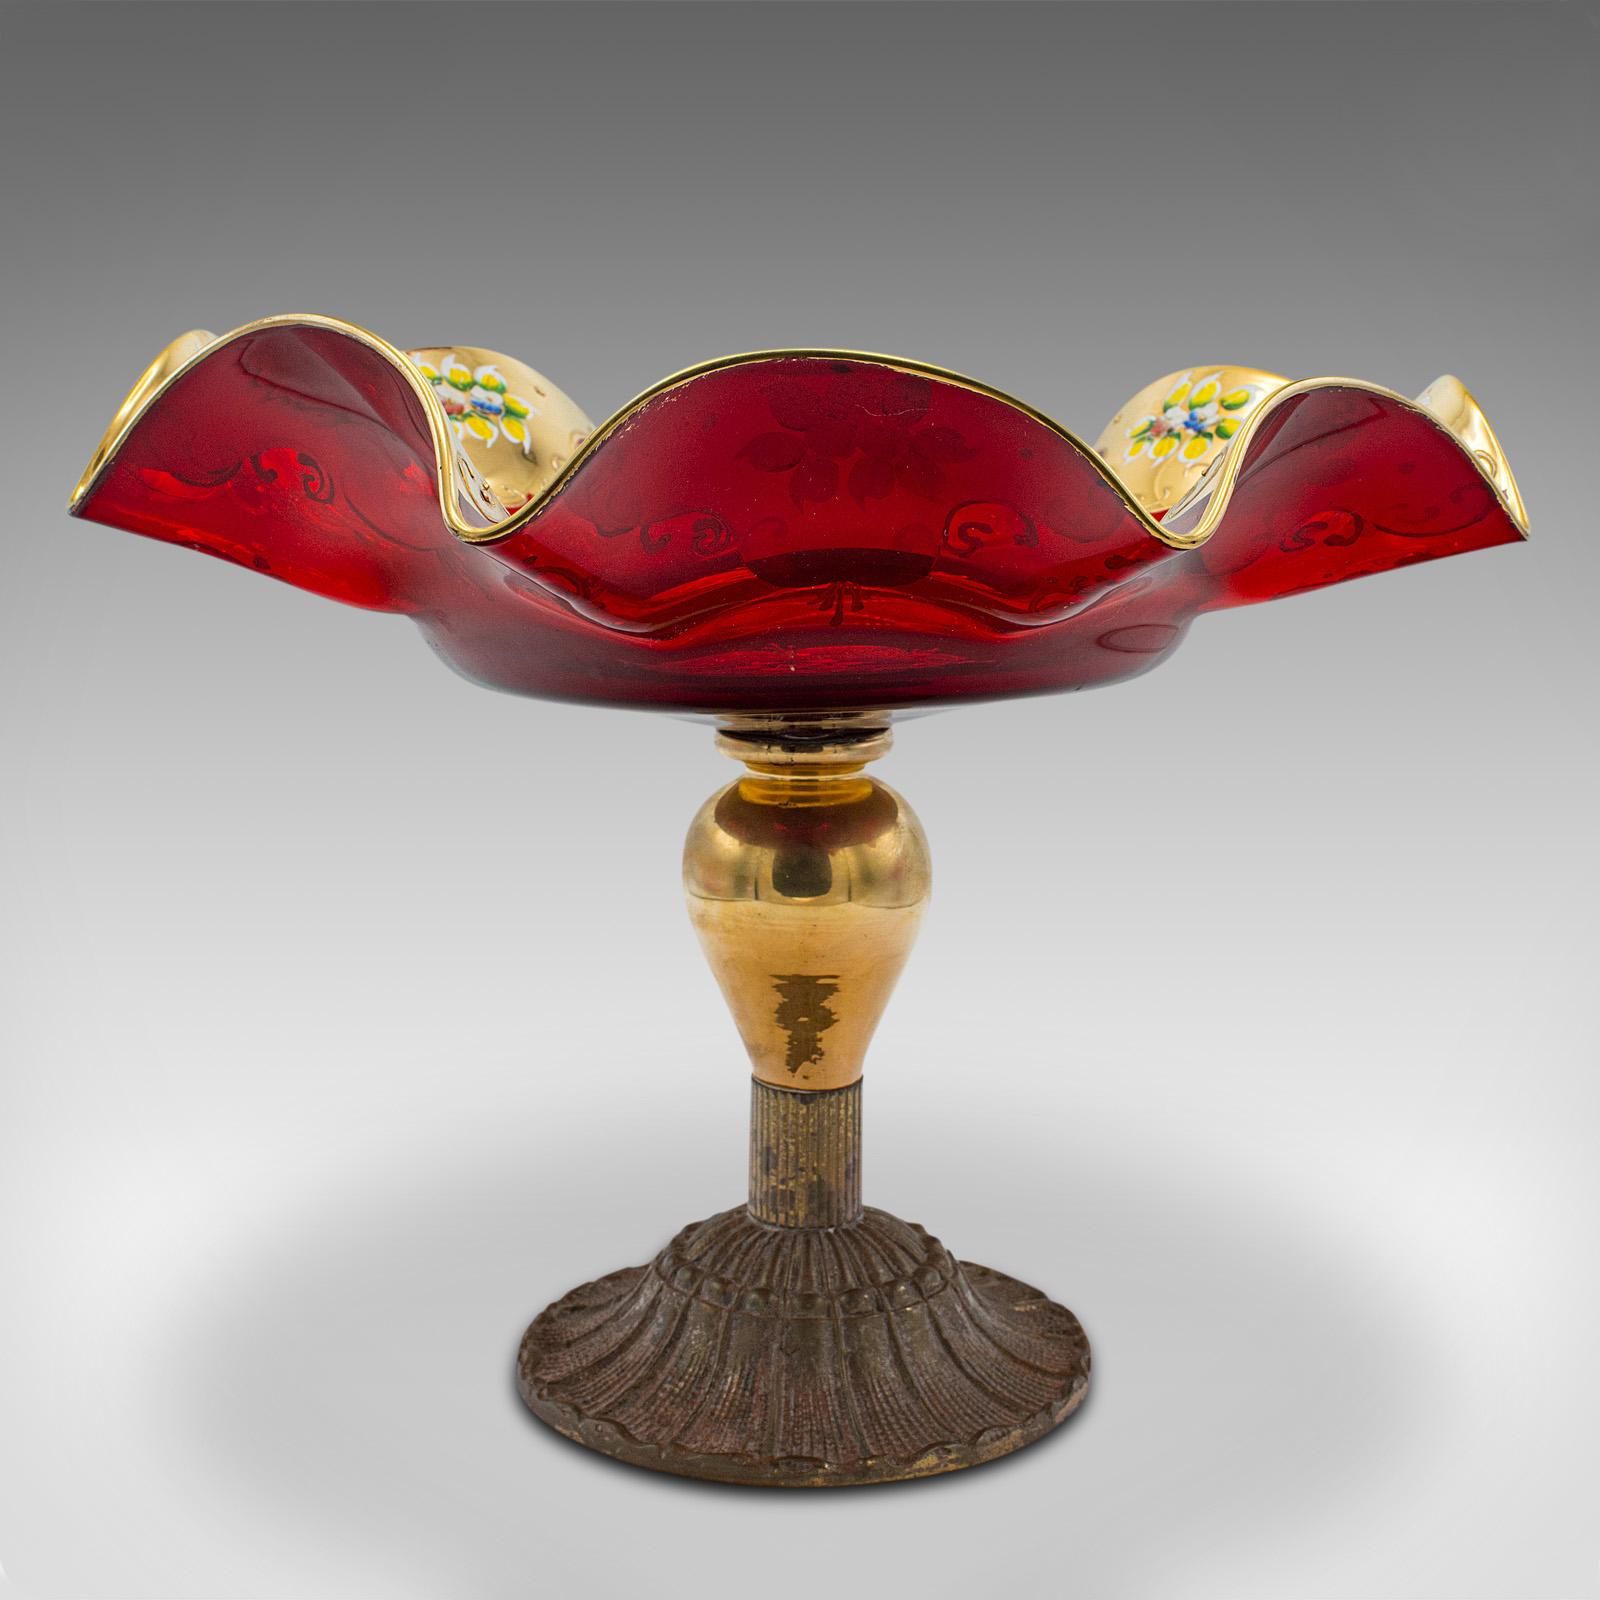 This is a vintage Venetian fruiter. An Italian, art glass and gilt finished decorative comport or fruit bowl, dating to the late 20th century, circa 1970.

Extravagant form, with striking colour and gilt appearance
Displays a desirable aged